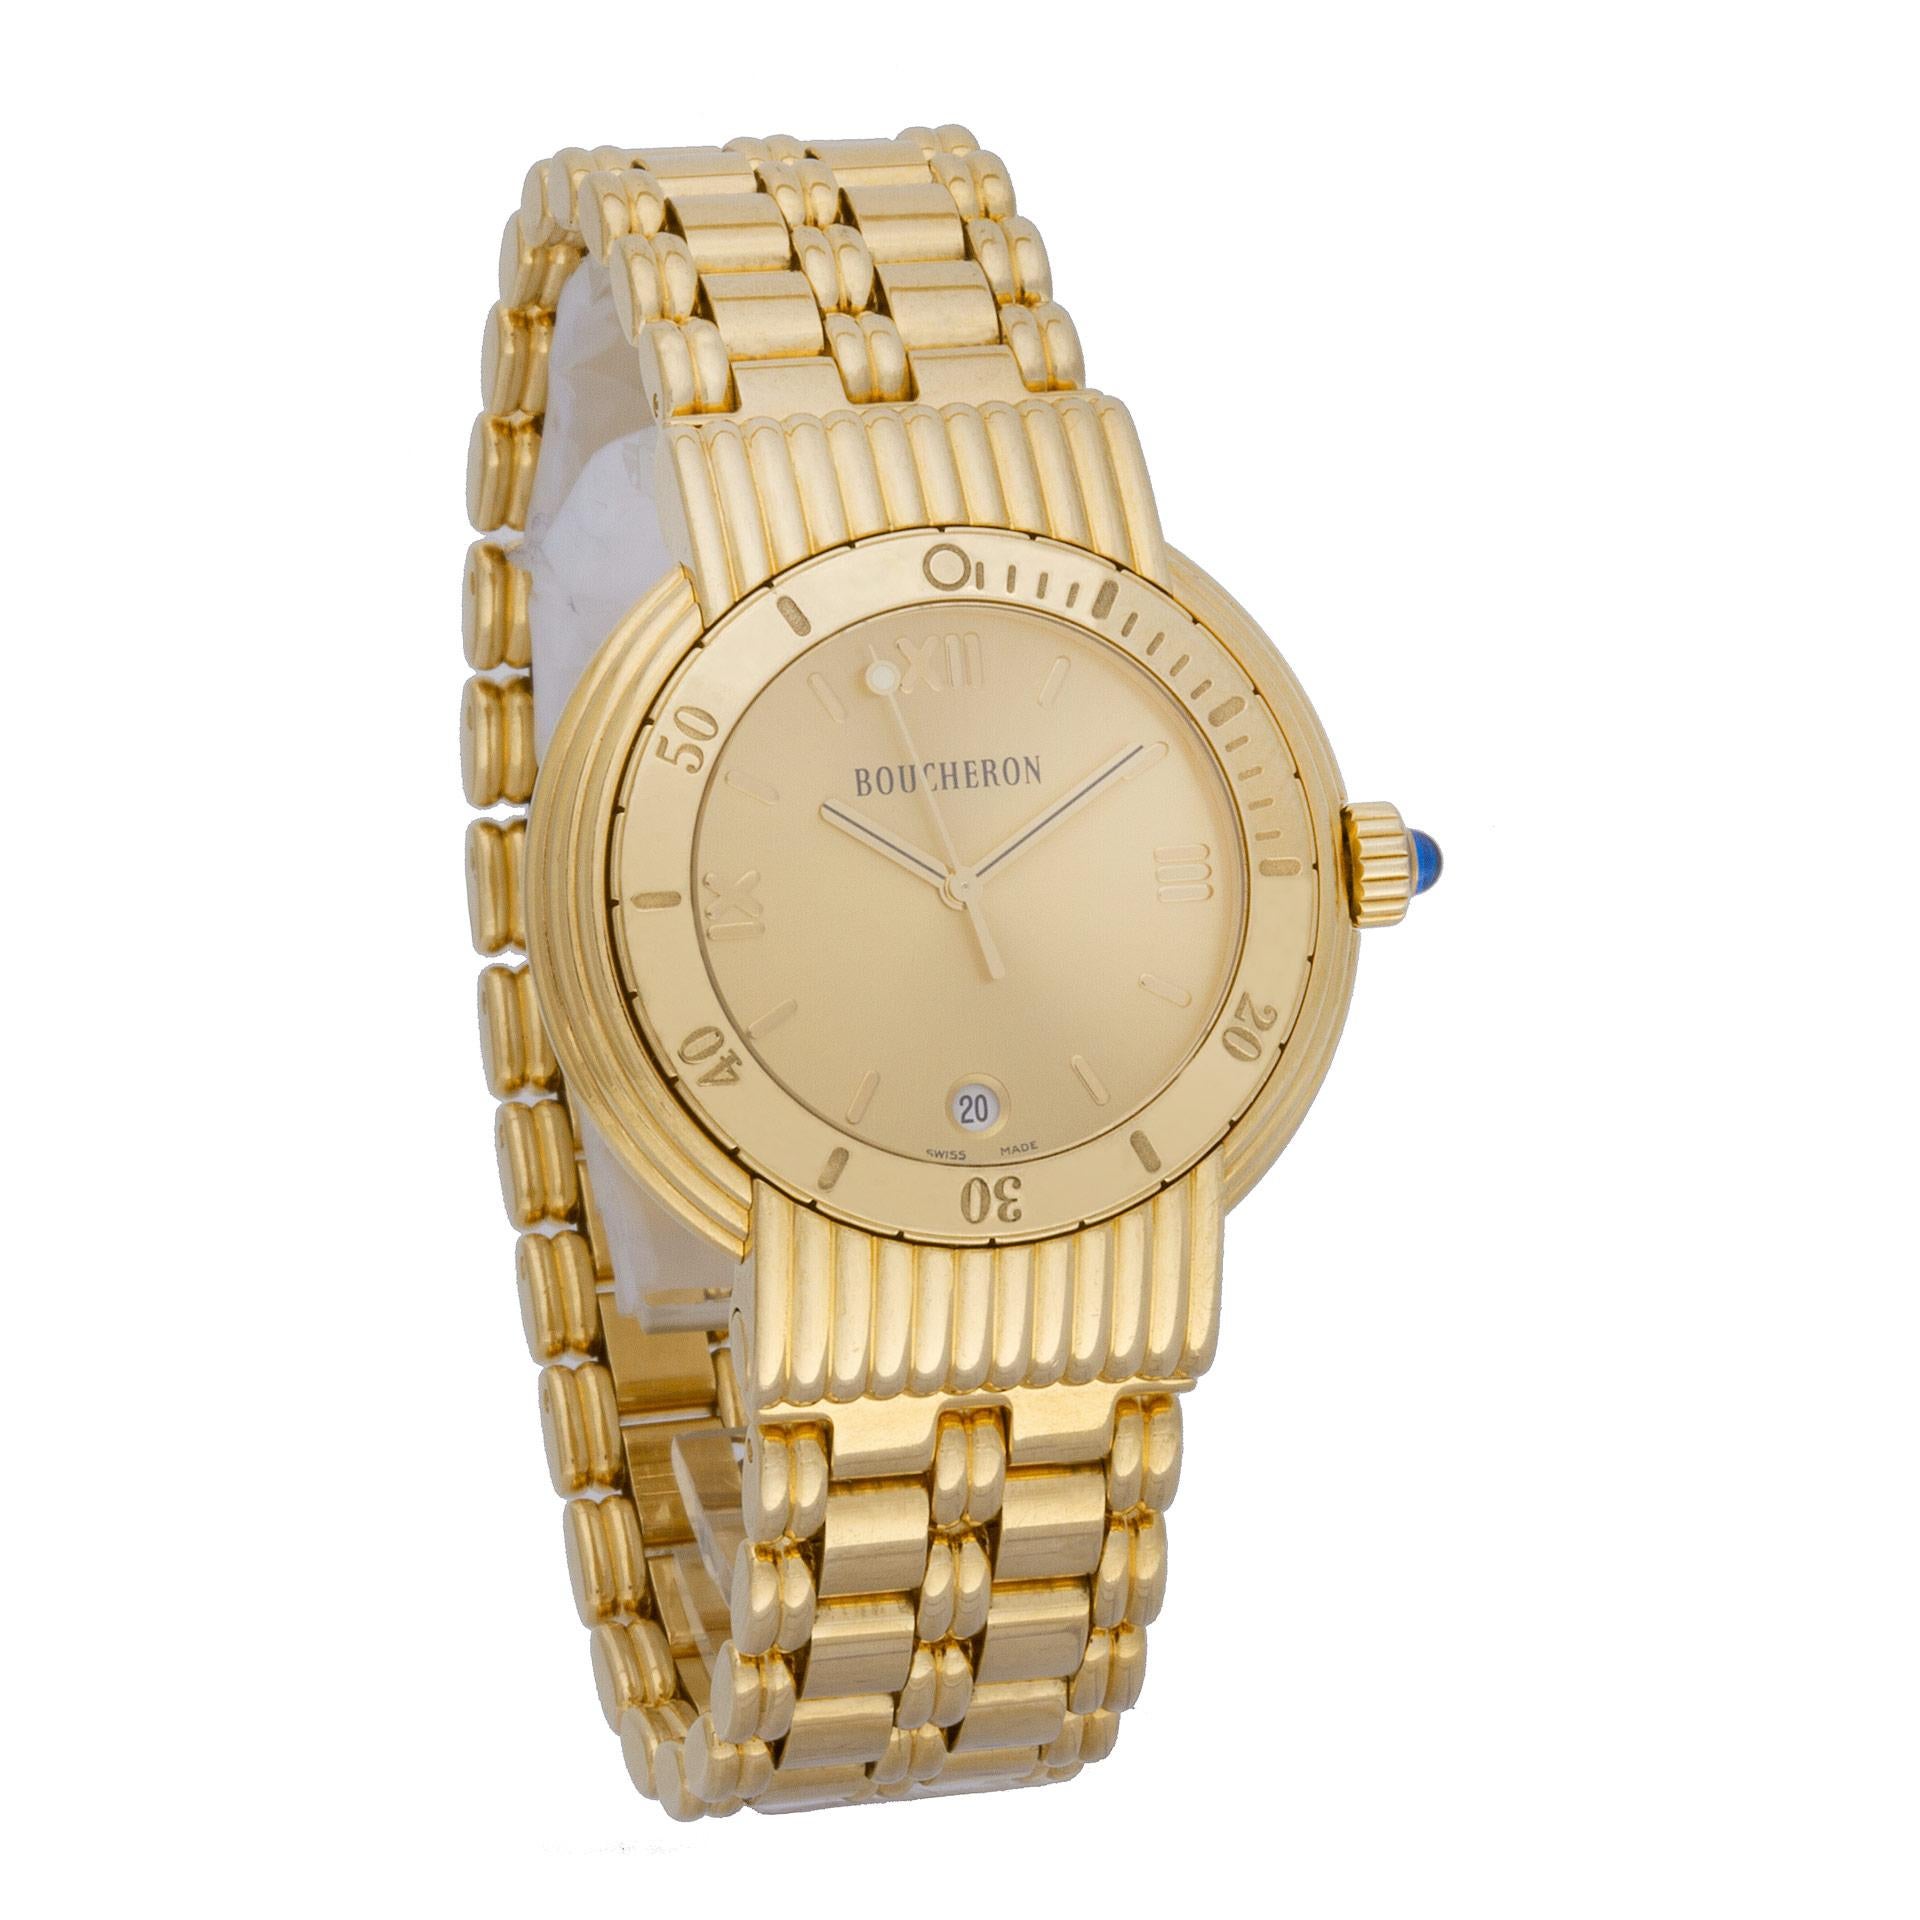 ESTIMATED RETAIL: $38,500 YOUR PRICE: $14,500 - Stylish Boucheron Paris watch from the 